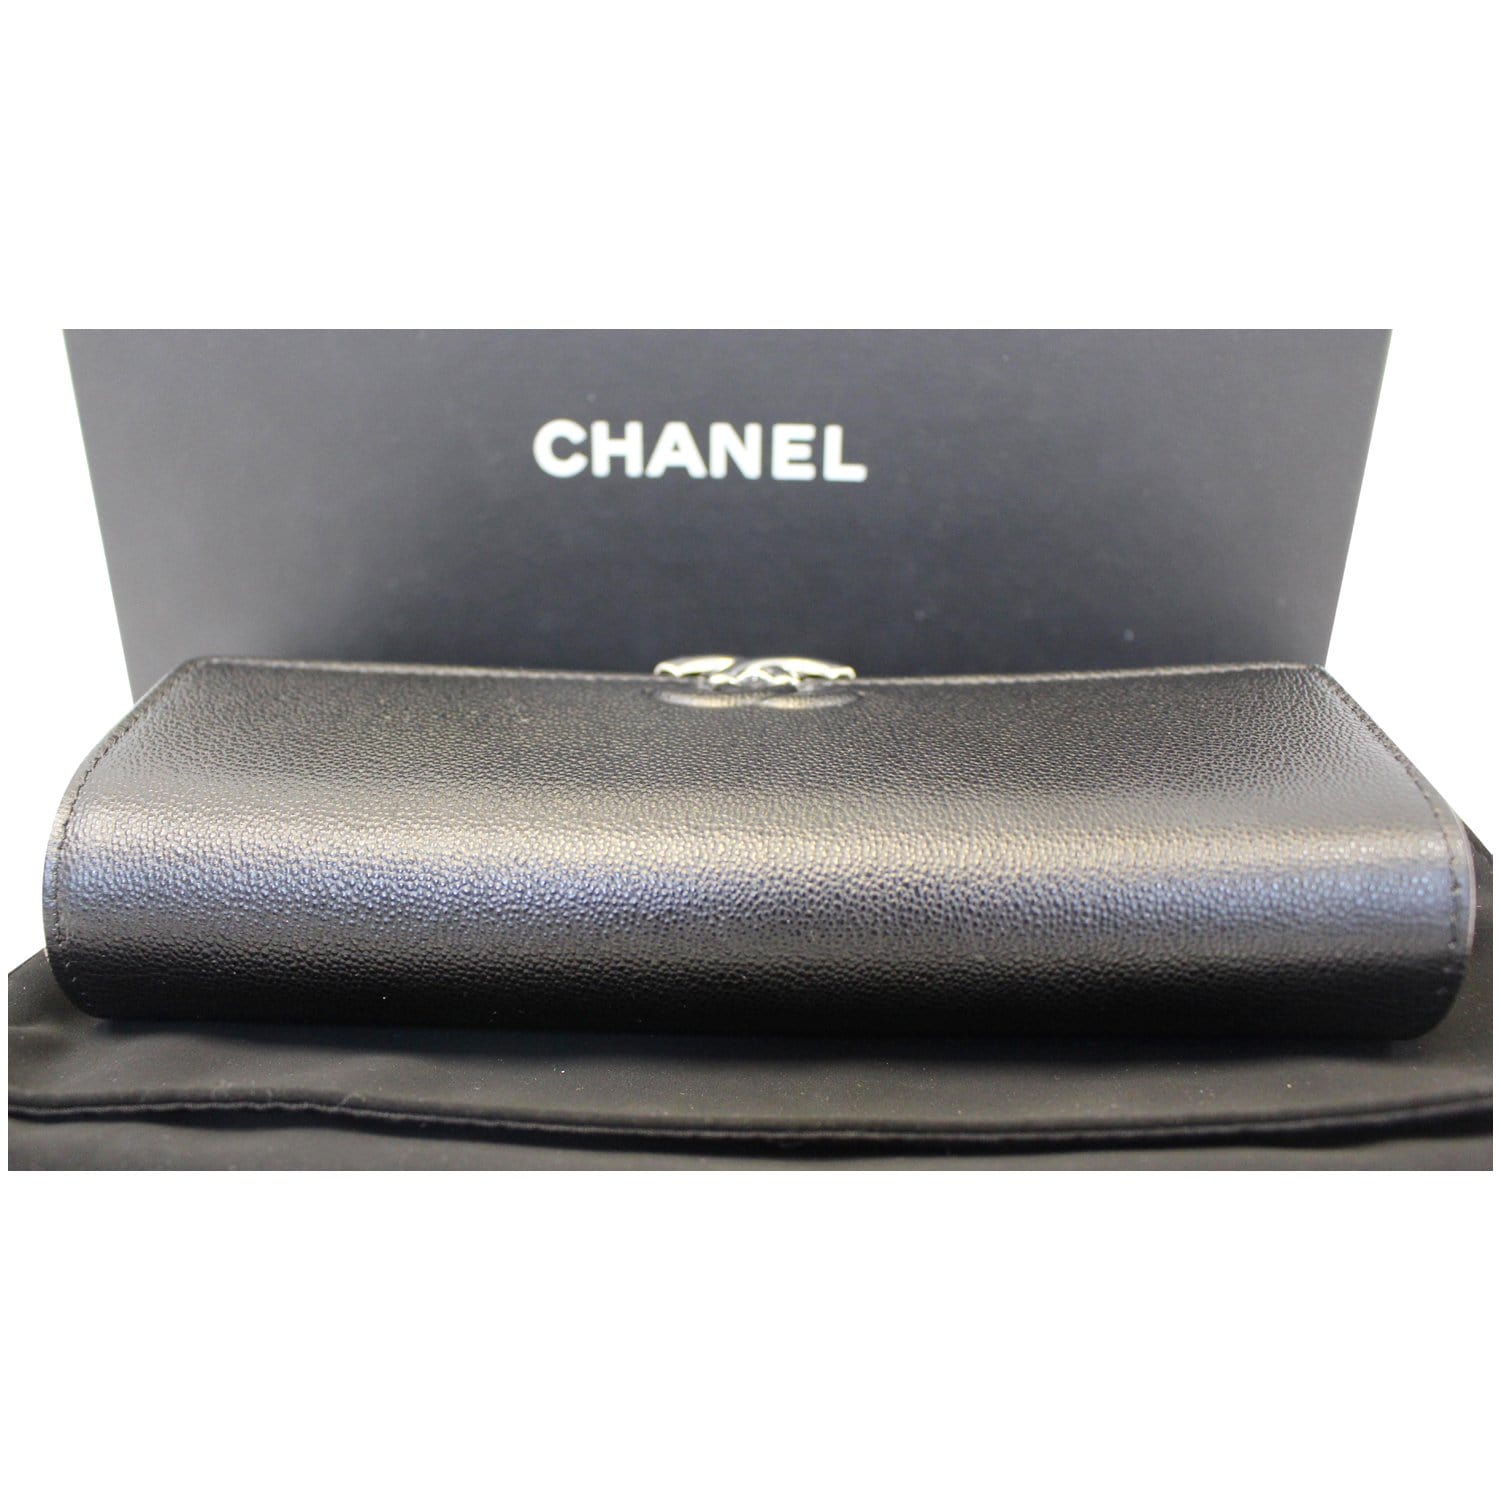 Authentic Chanel Patent Leather Compact Wallet – Relics to Rhinestones